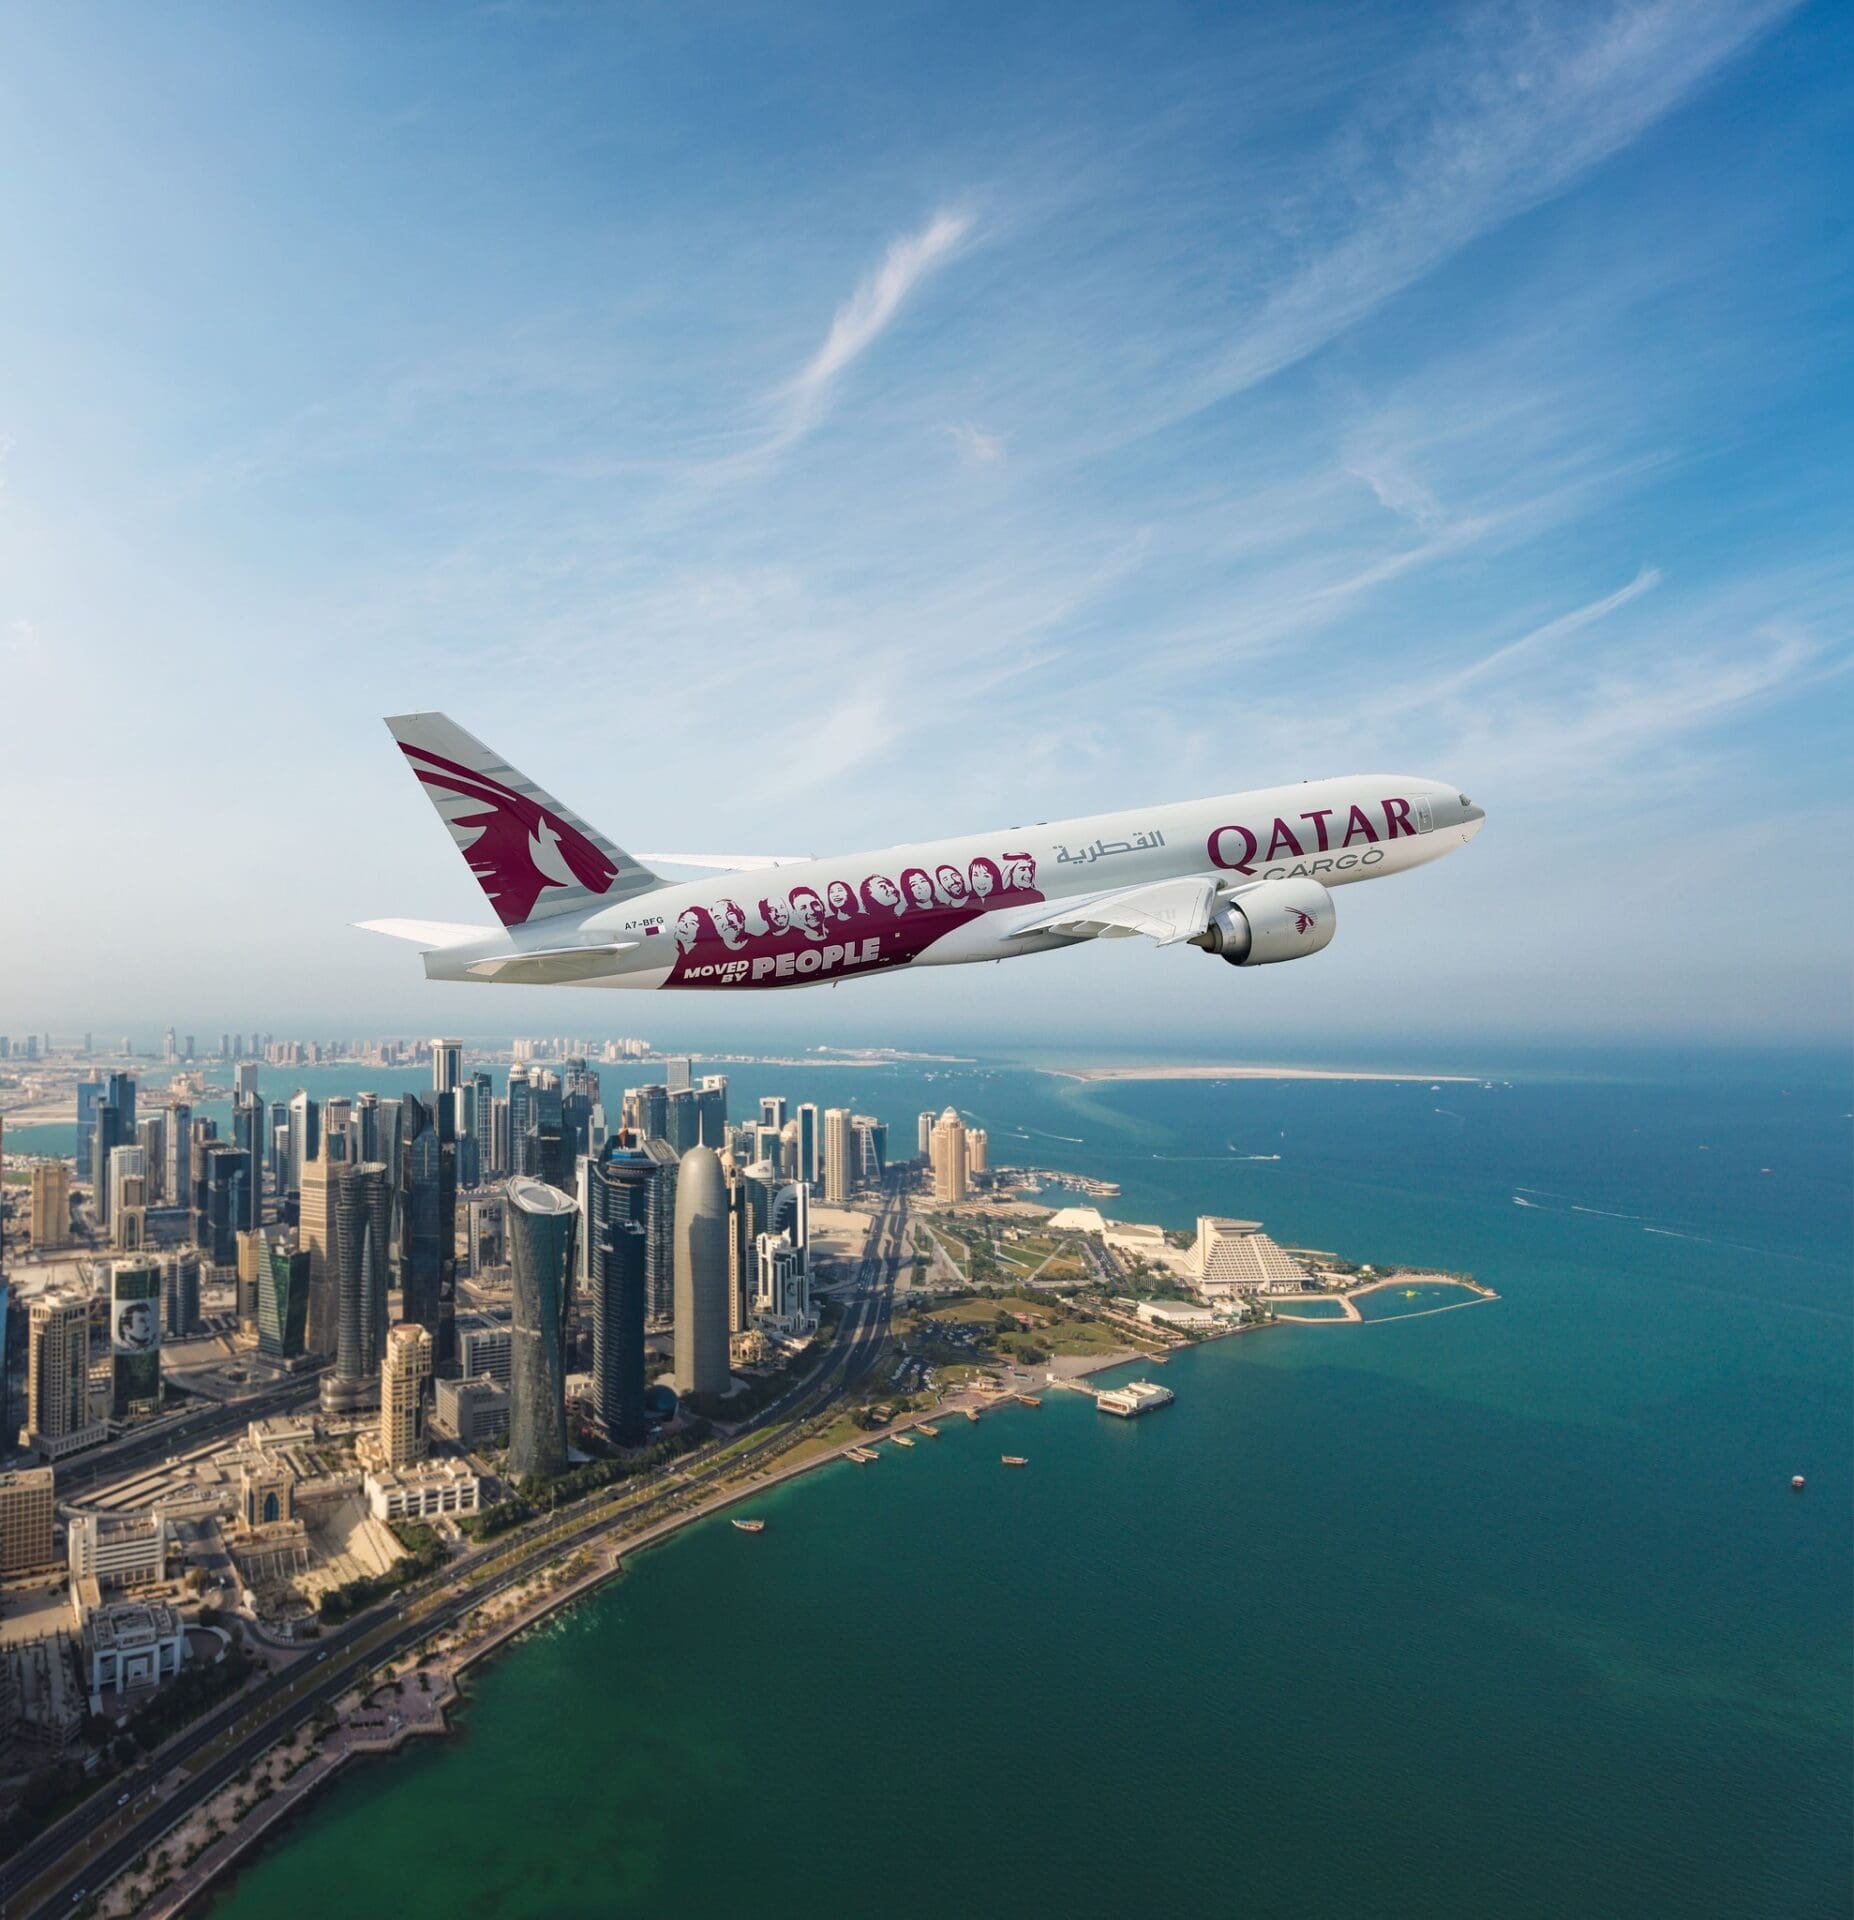 A Qatar Airways plane flying over the sea and Middle Eastern city